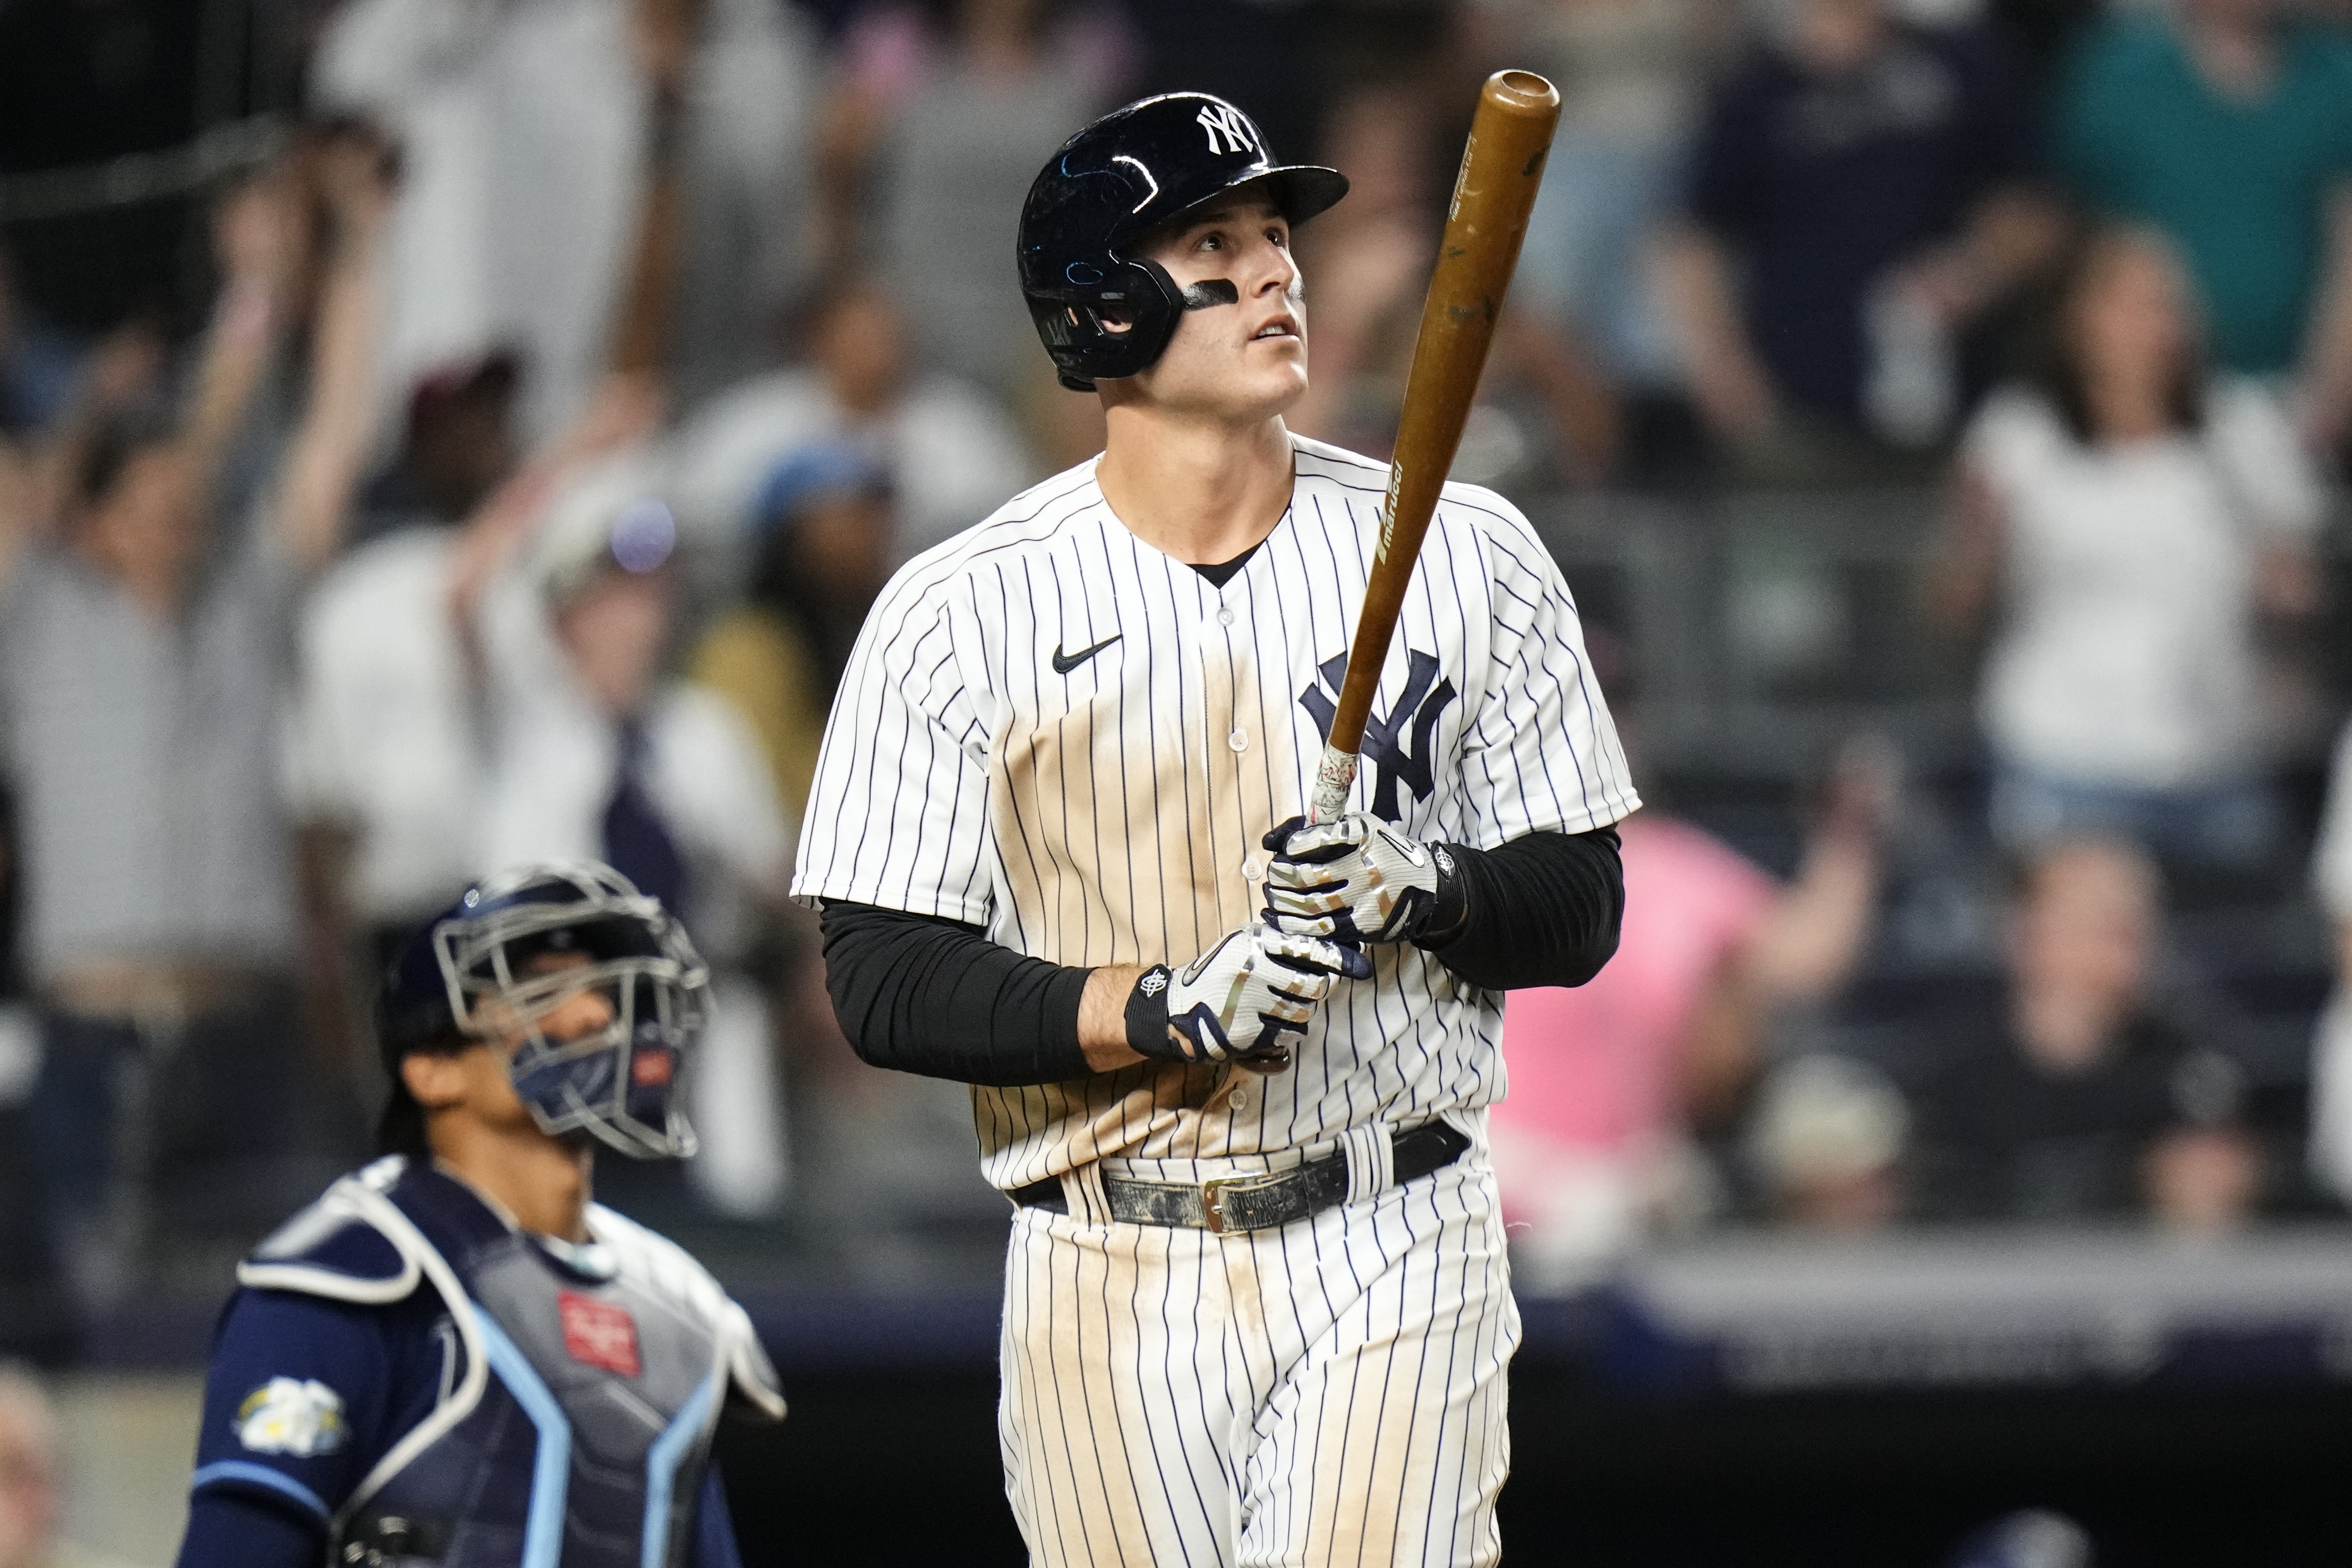 Jason Adam gives up late homer to Anthony Rizzo, Rays lose to Yankees